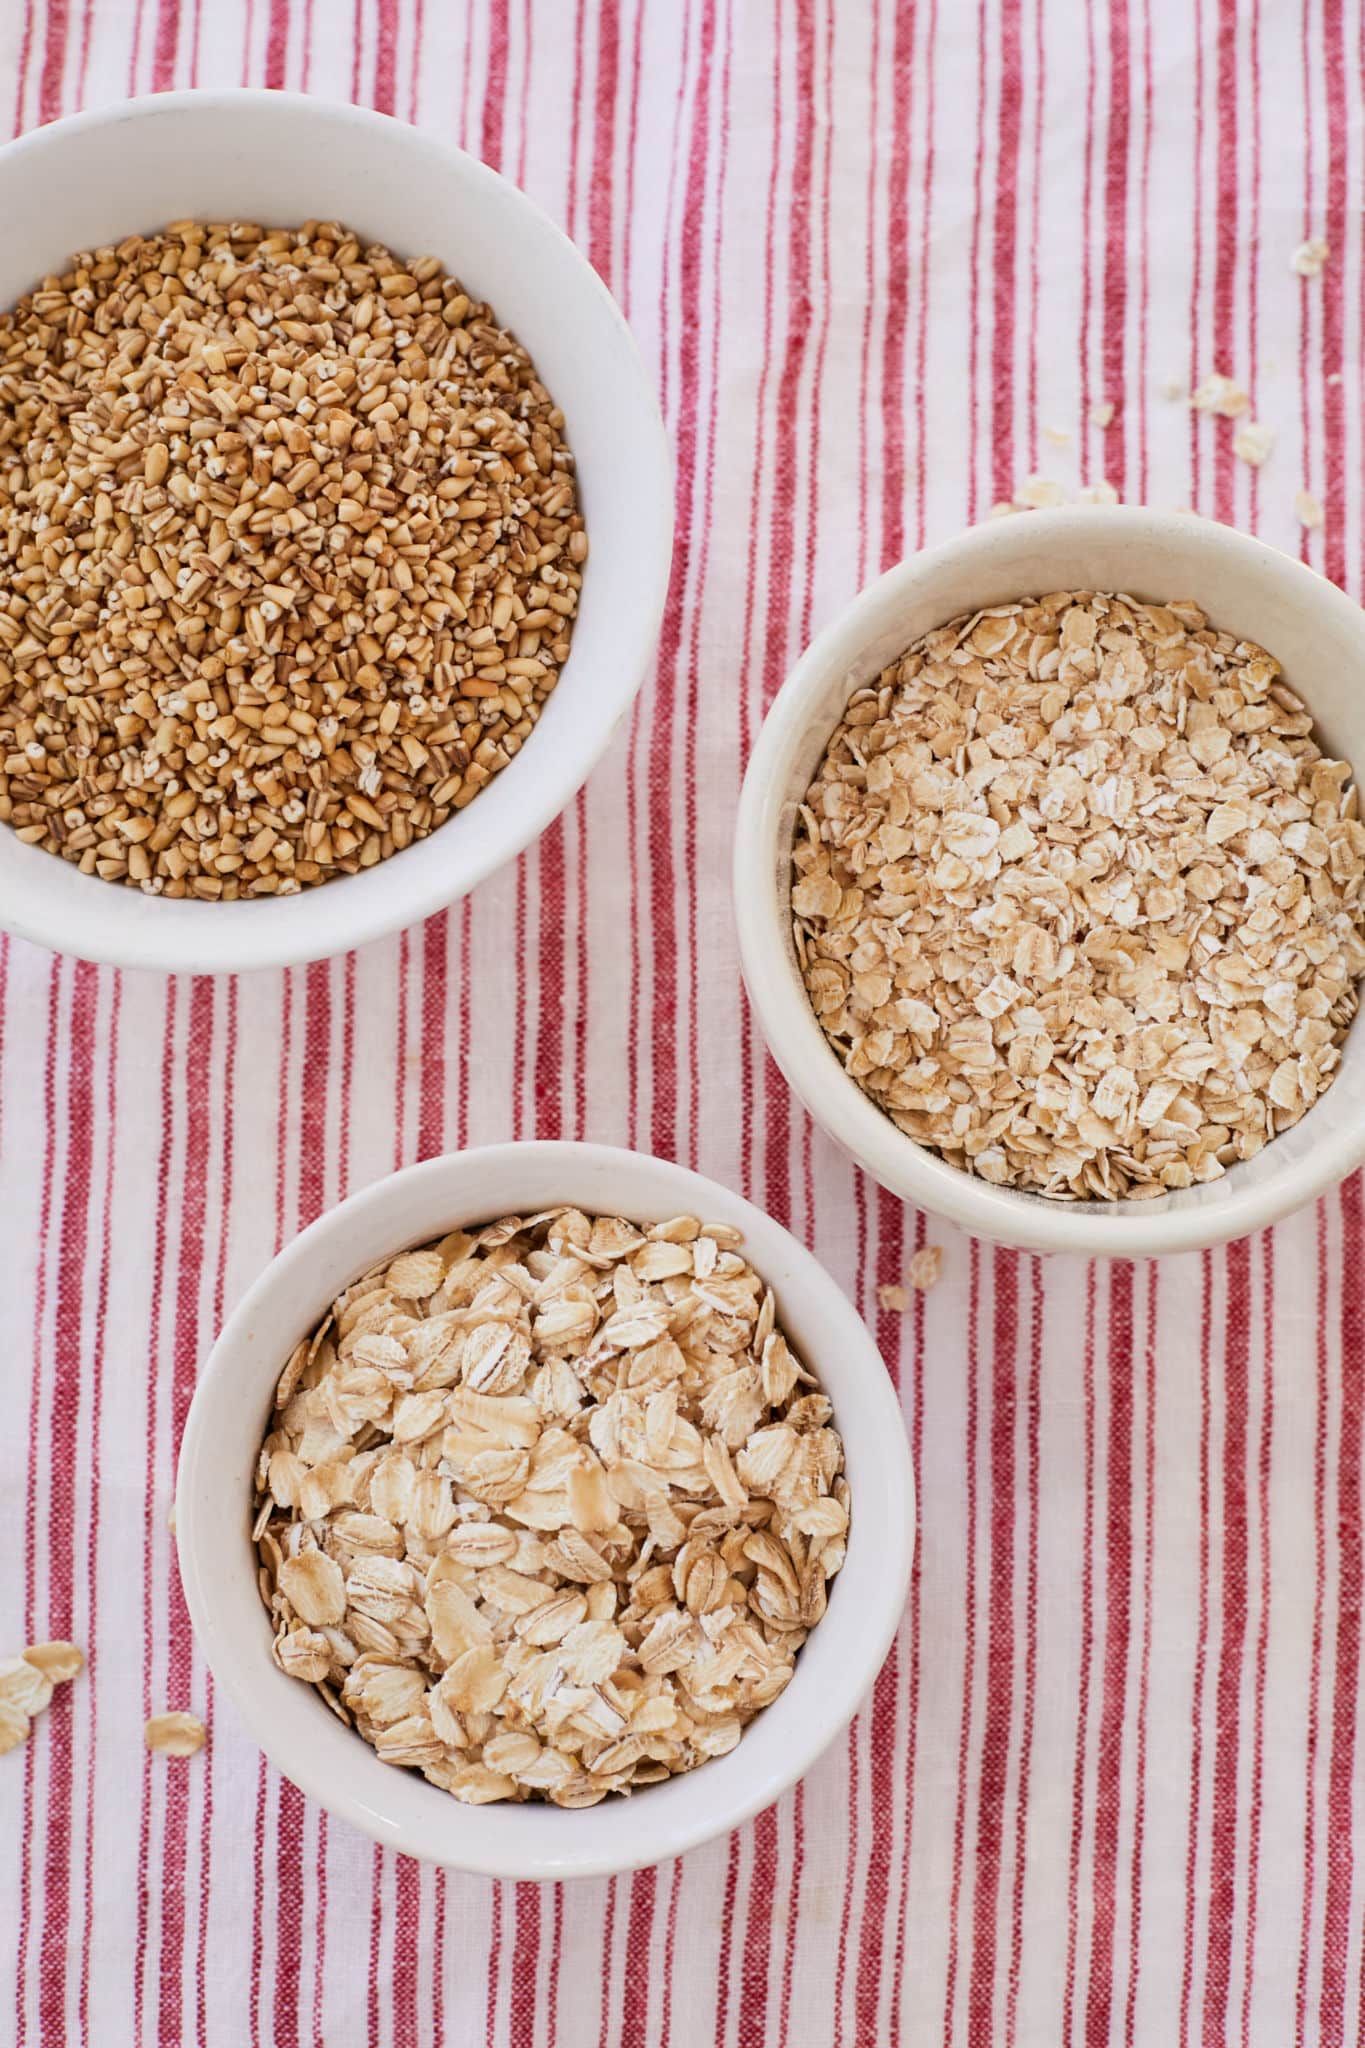 Three different types of oats are displayed in white bowls. On the top left is whole oat bran, toward the middle on the right side are instant oats, and at the bottom toward the left are old-fashioned oats. 